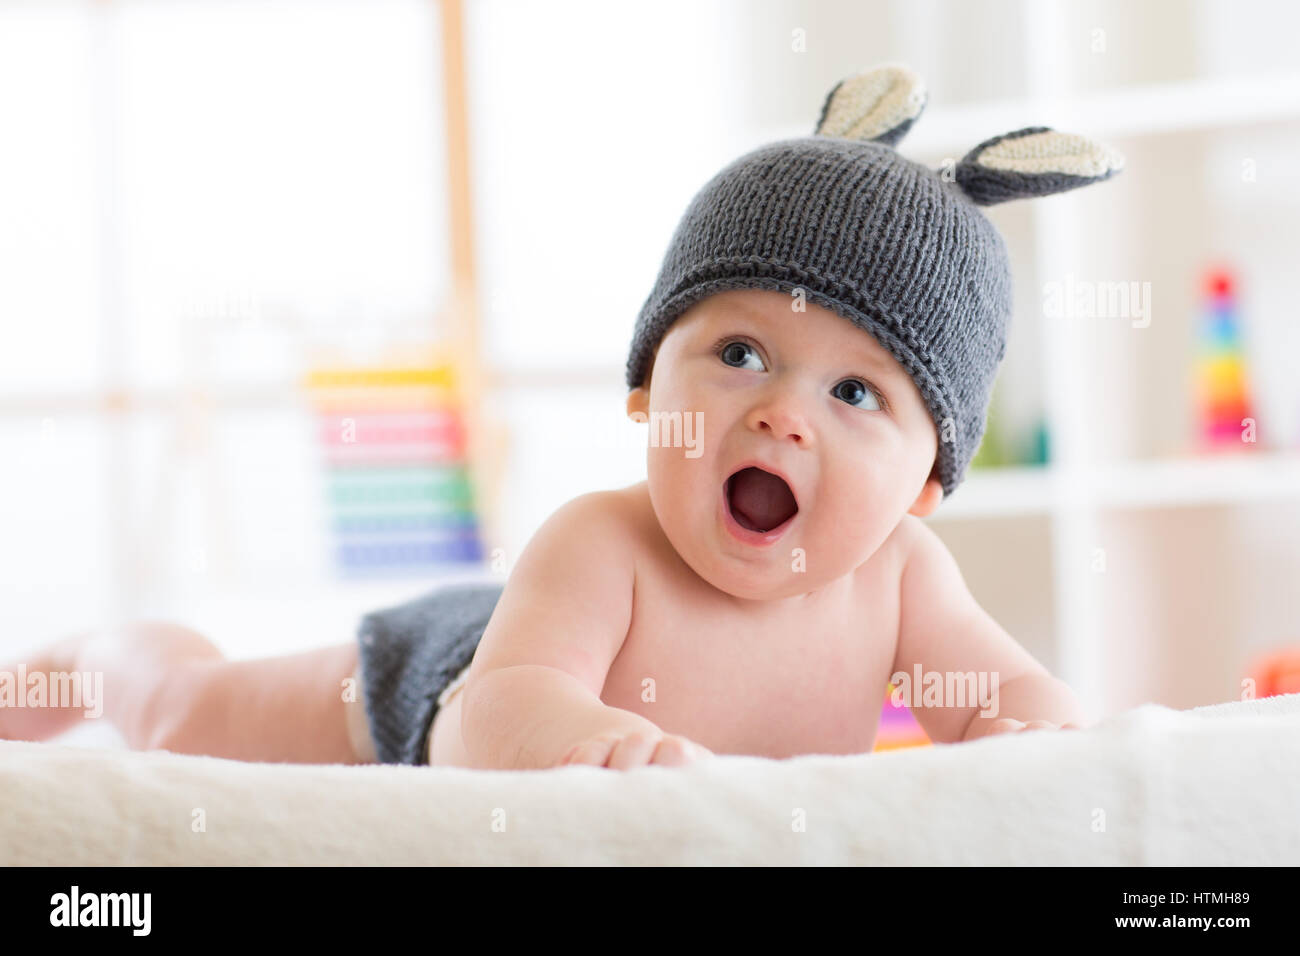 Smiling cute baby child in rabbit costume lying on bed in nursery Stock Photo